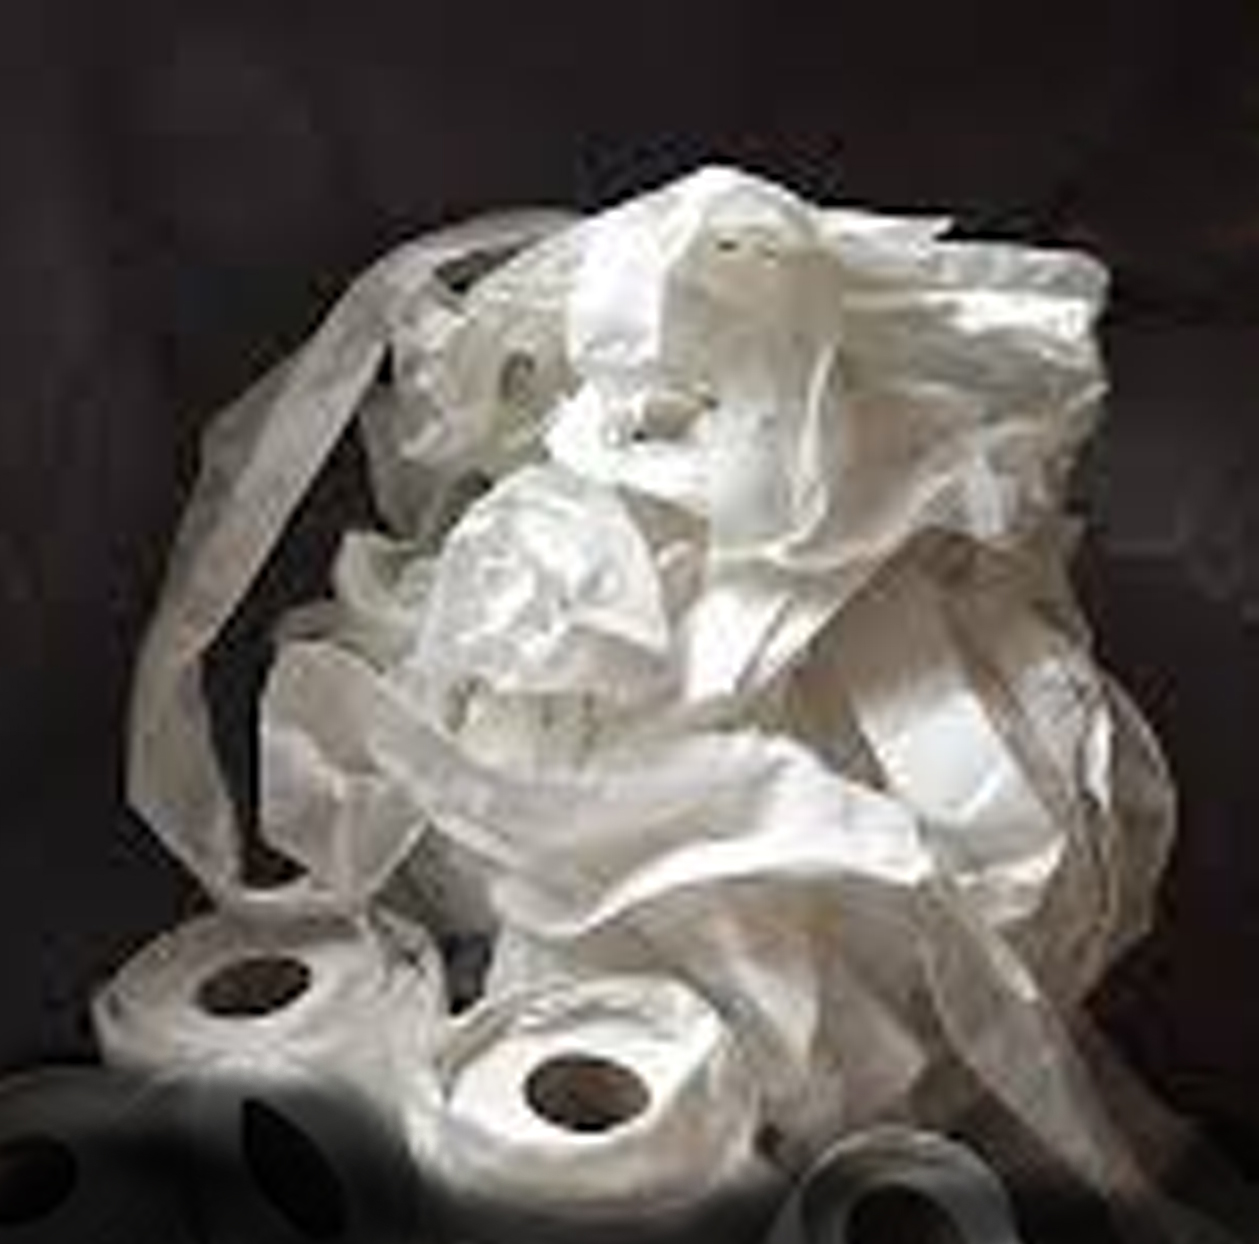 toilet paper unrolled